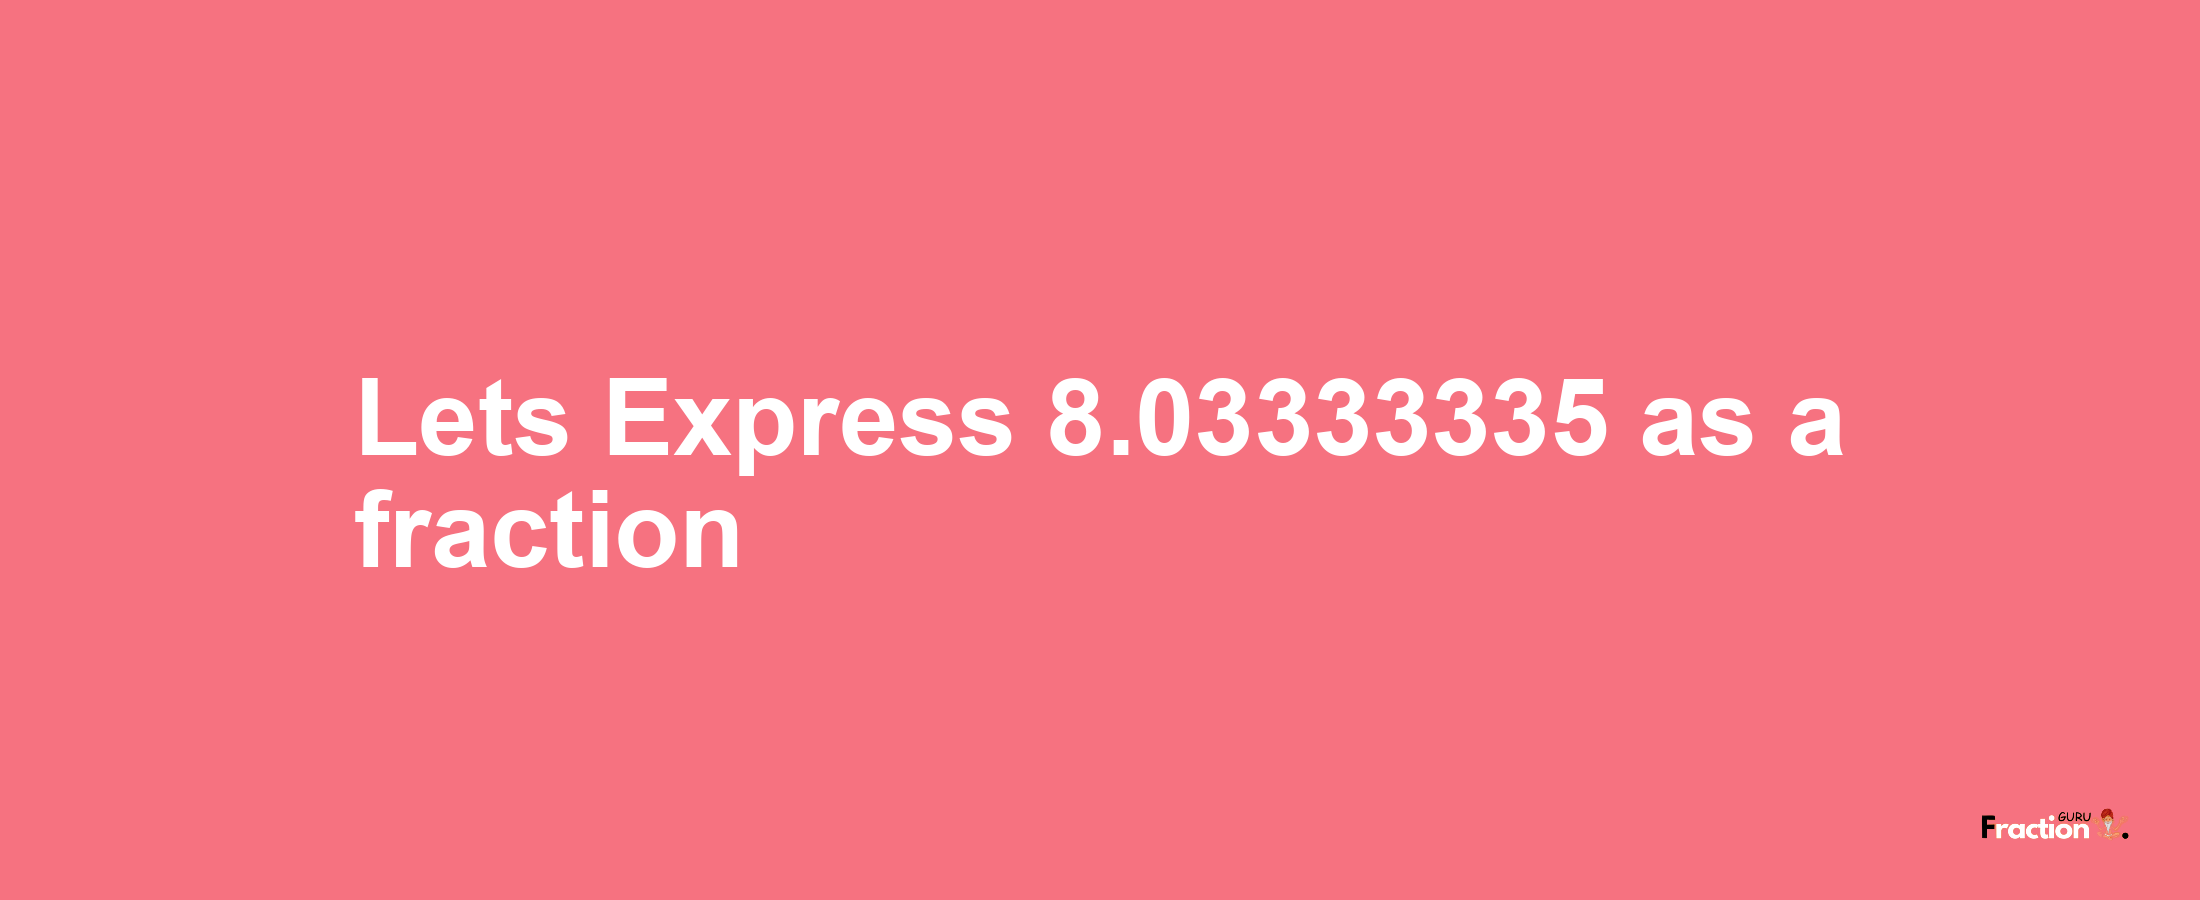 Lets Express 8.03333335 as afraction